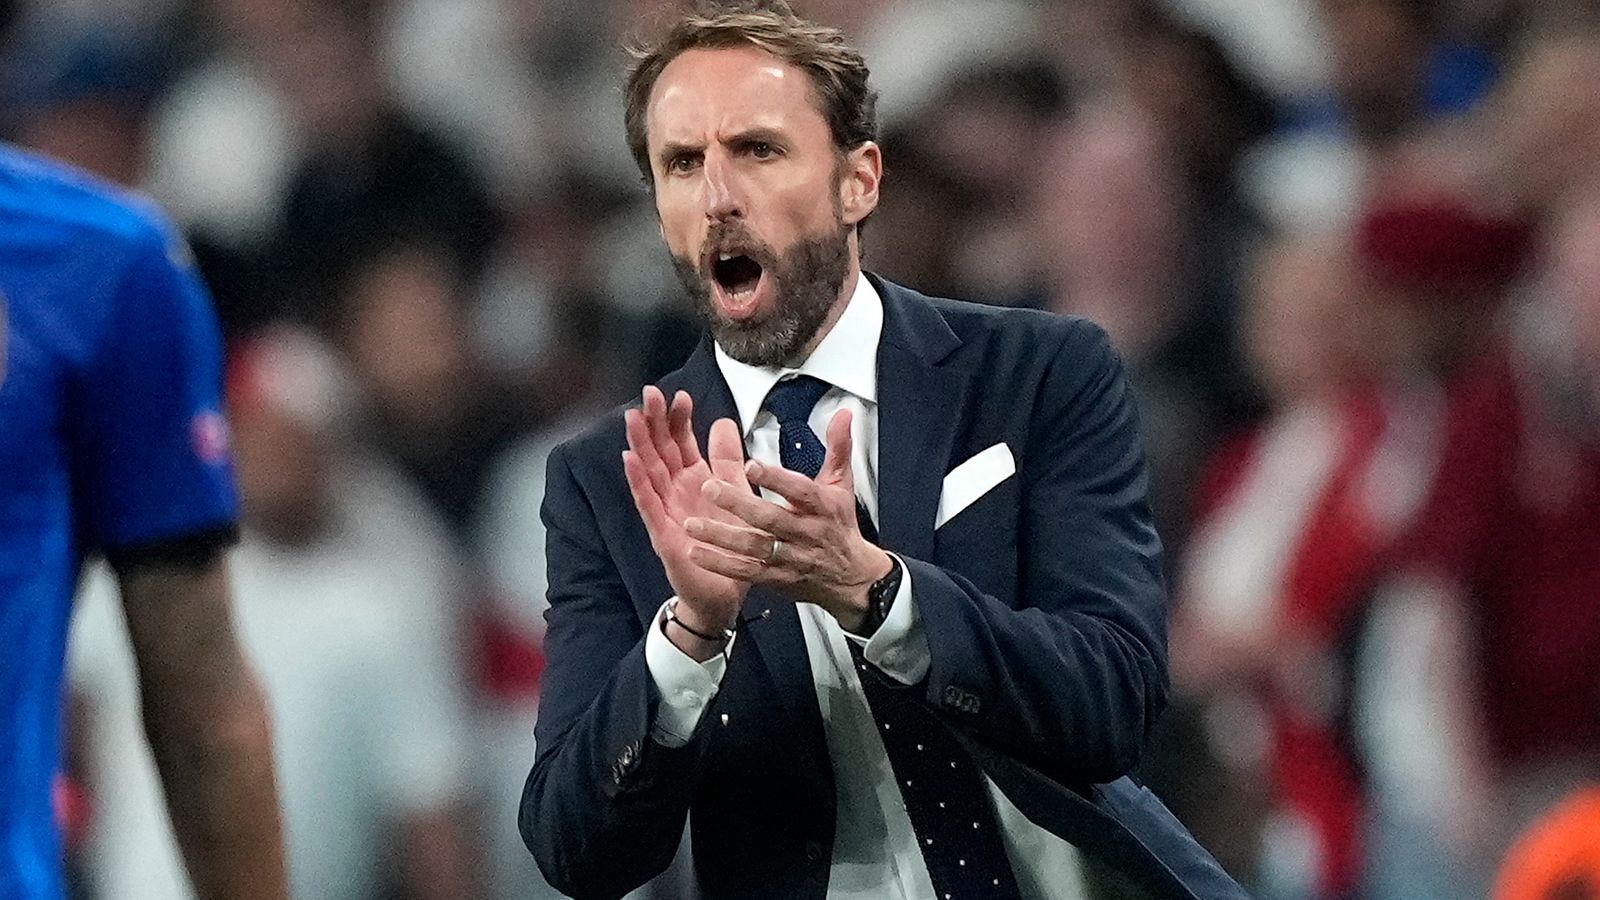 England: Gareth Southgate rules out boycott of 2022 World Cup